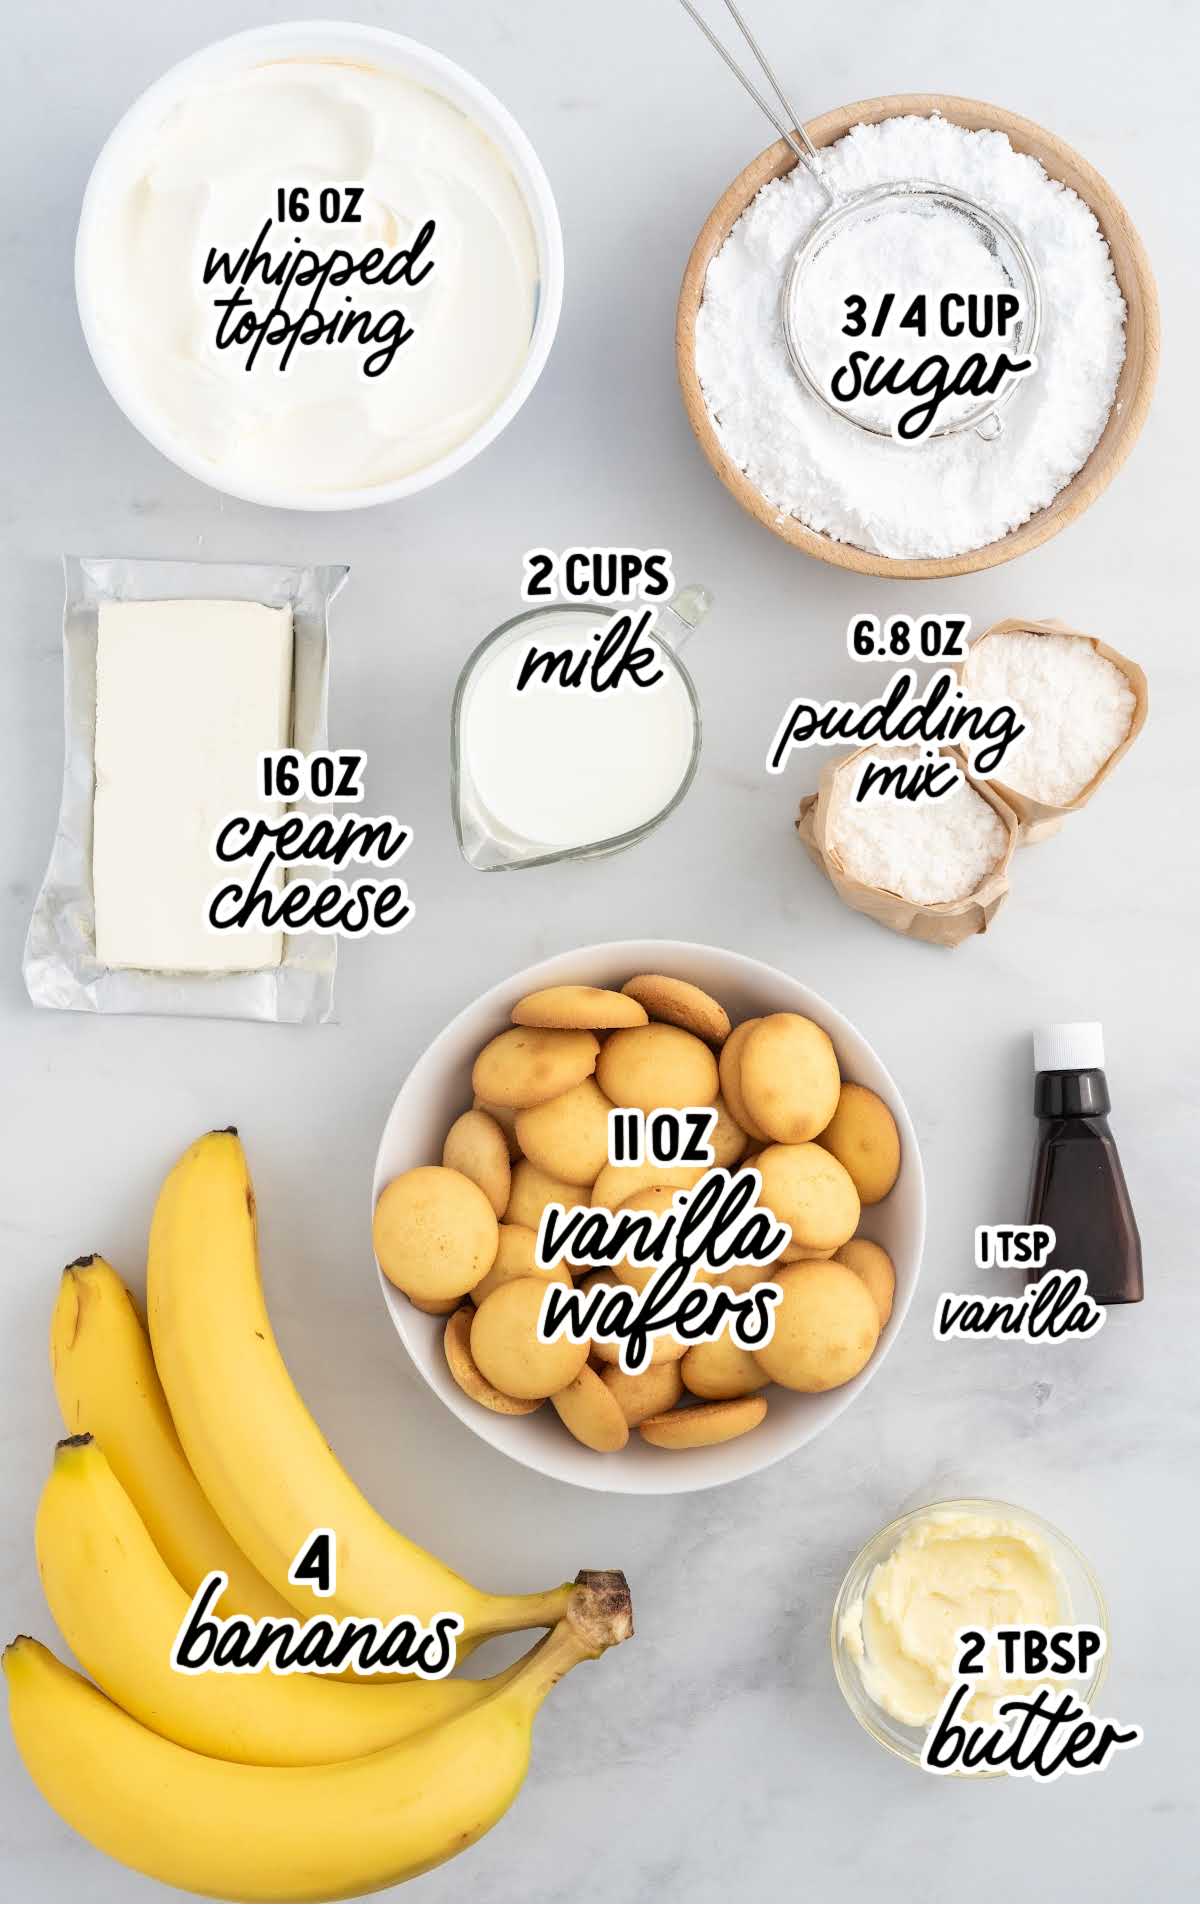 Banana Delight raw ingredients that are labeled